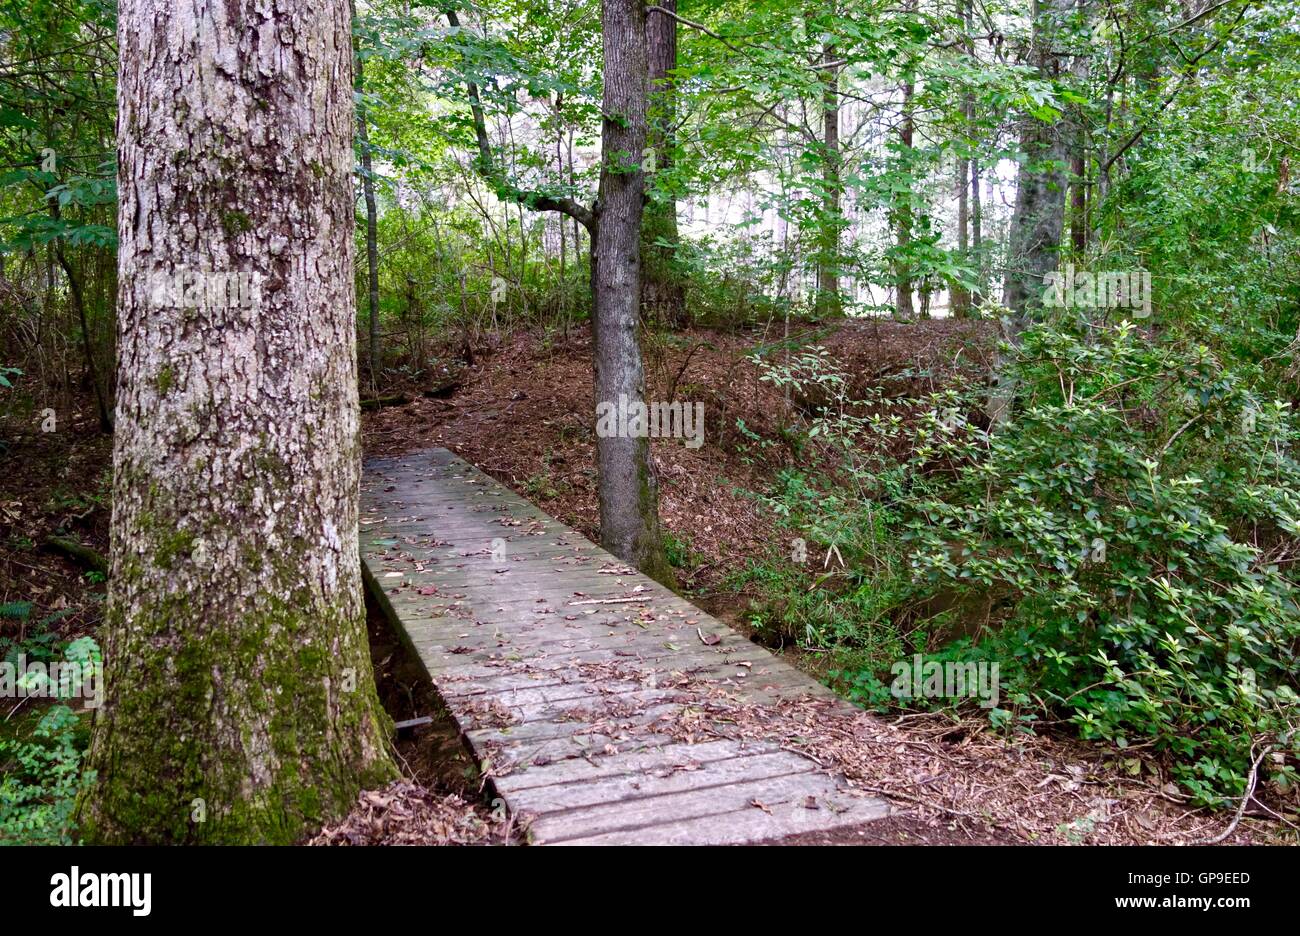 Bridge over a creek on a hiking trail in a forest. Stock Photo